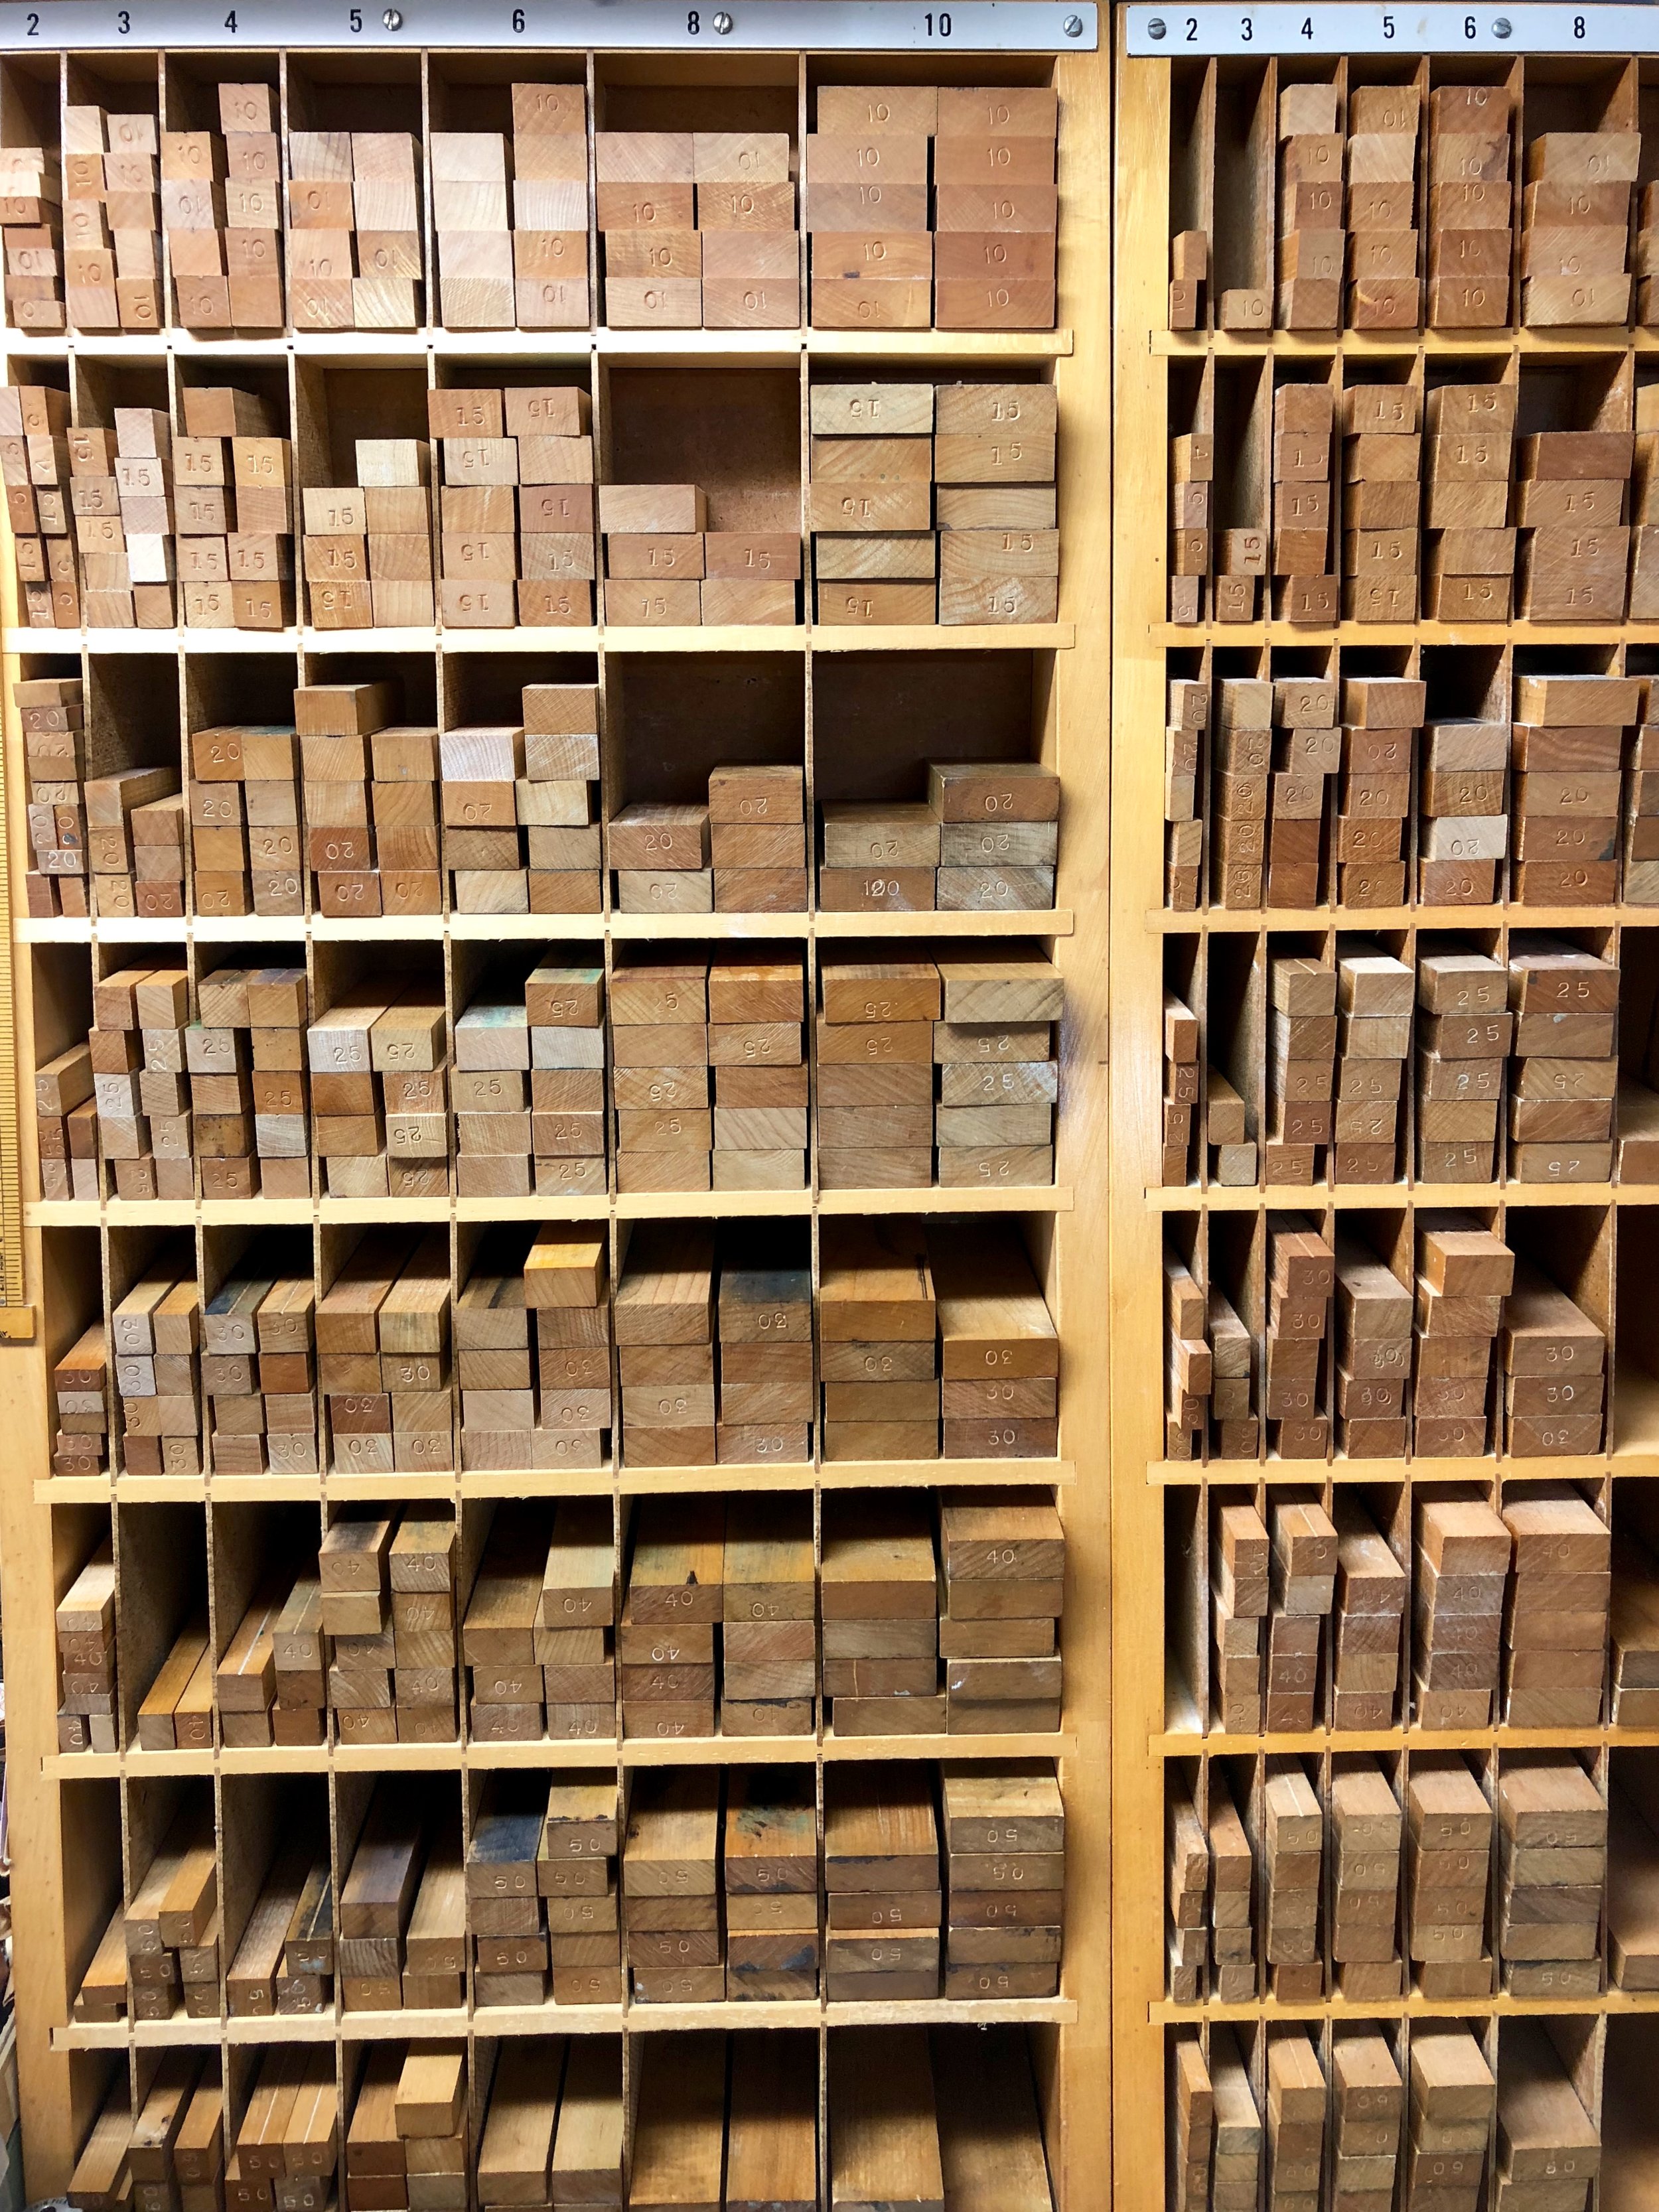 Racks of wood furniture at St Brigid Press, ordered according to length and width.